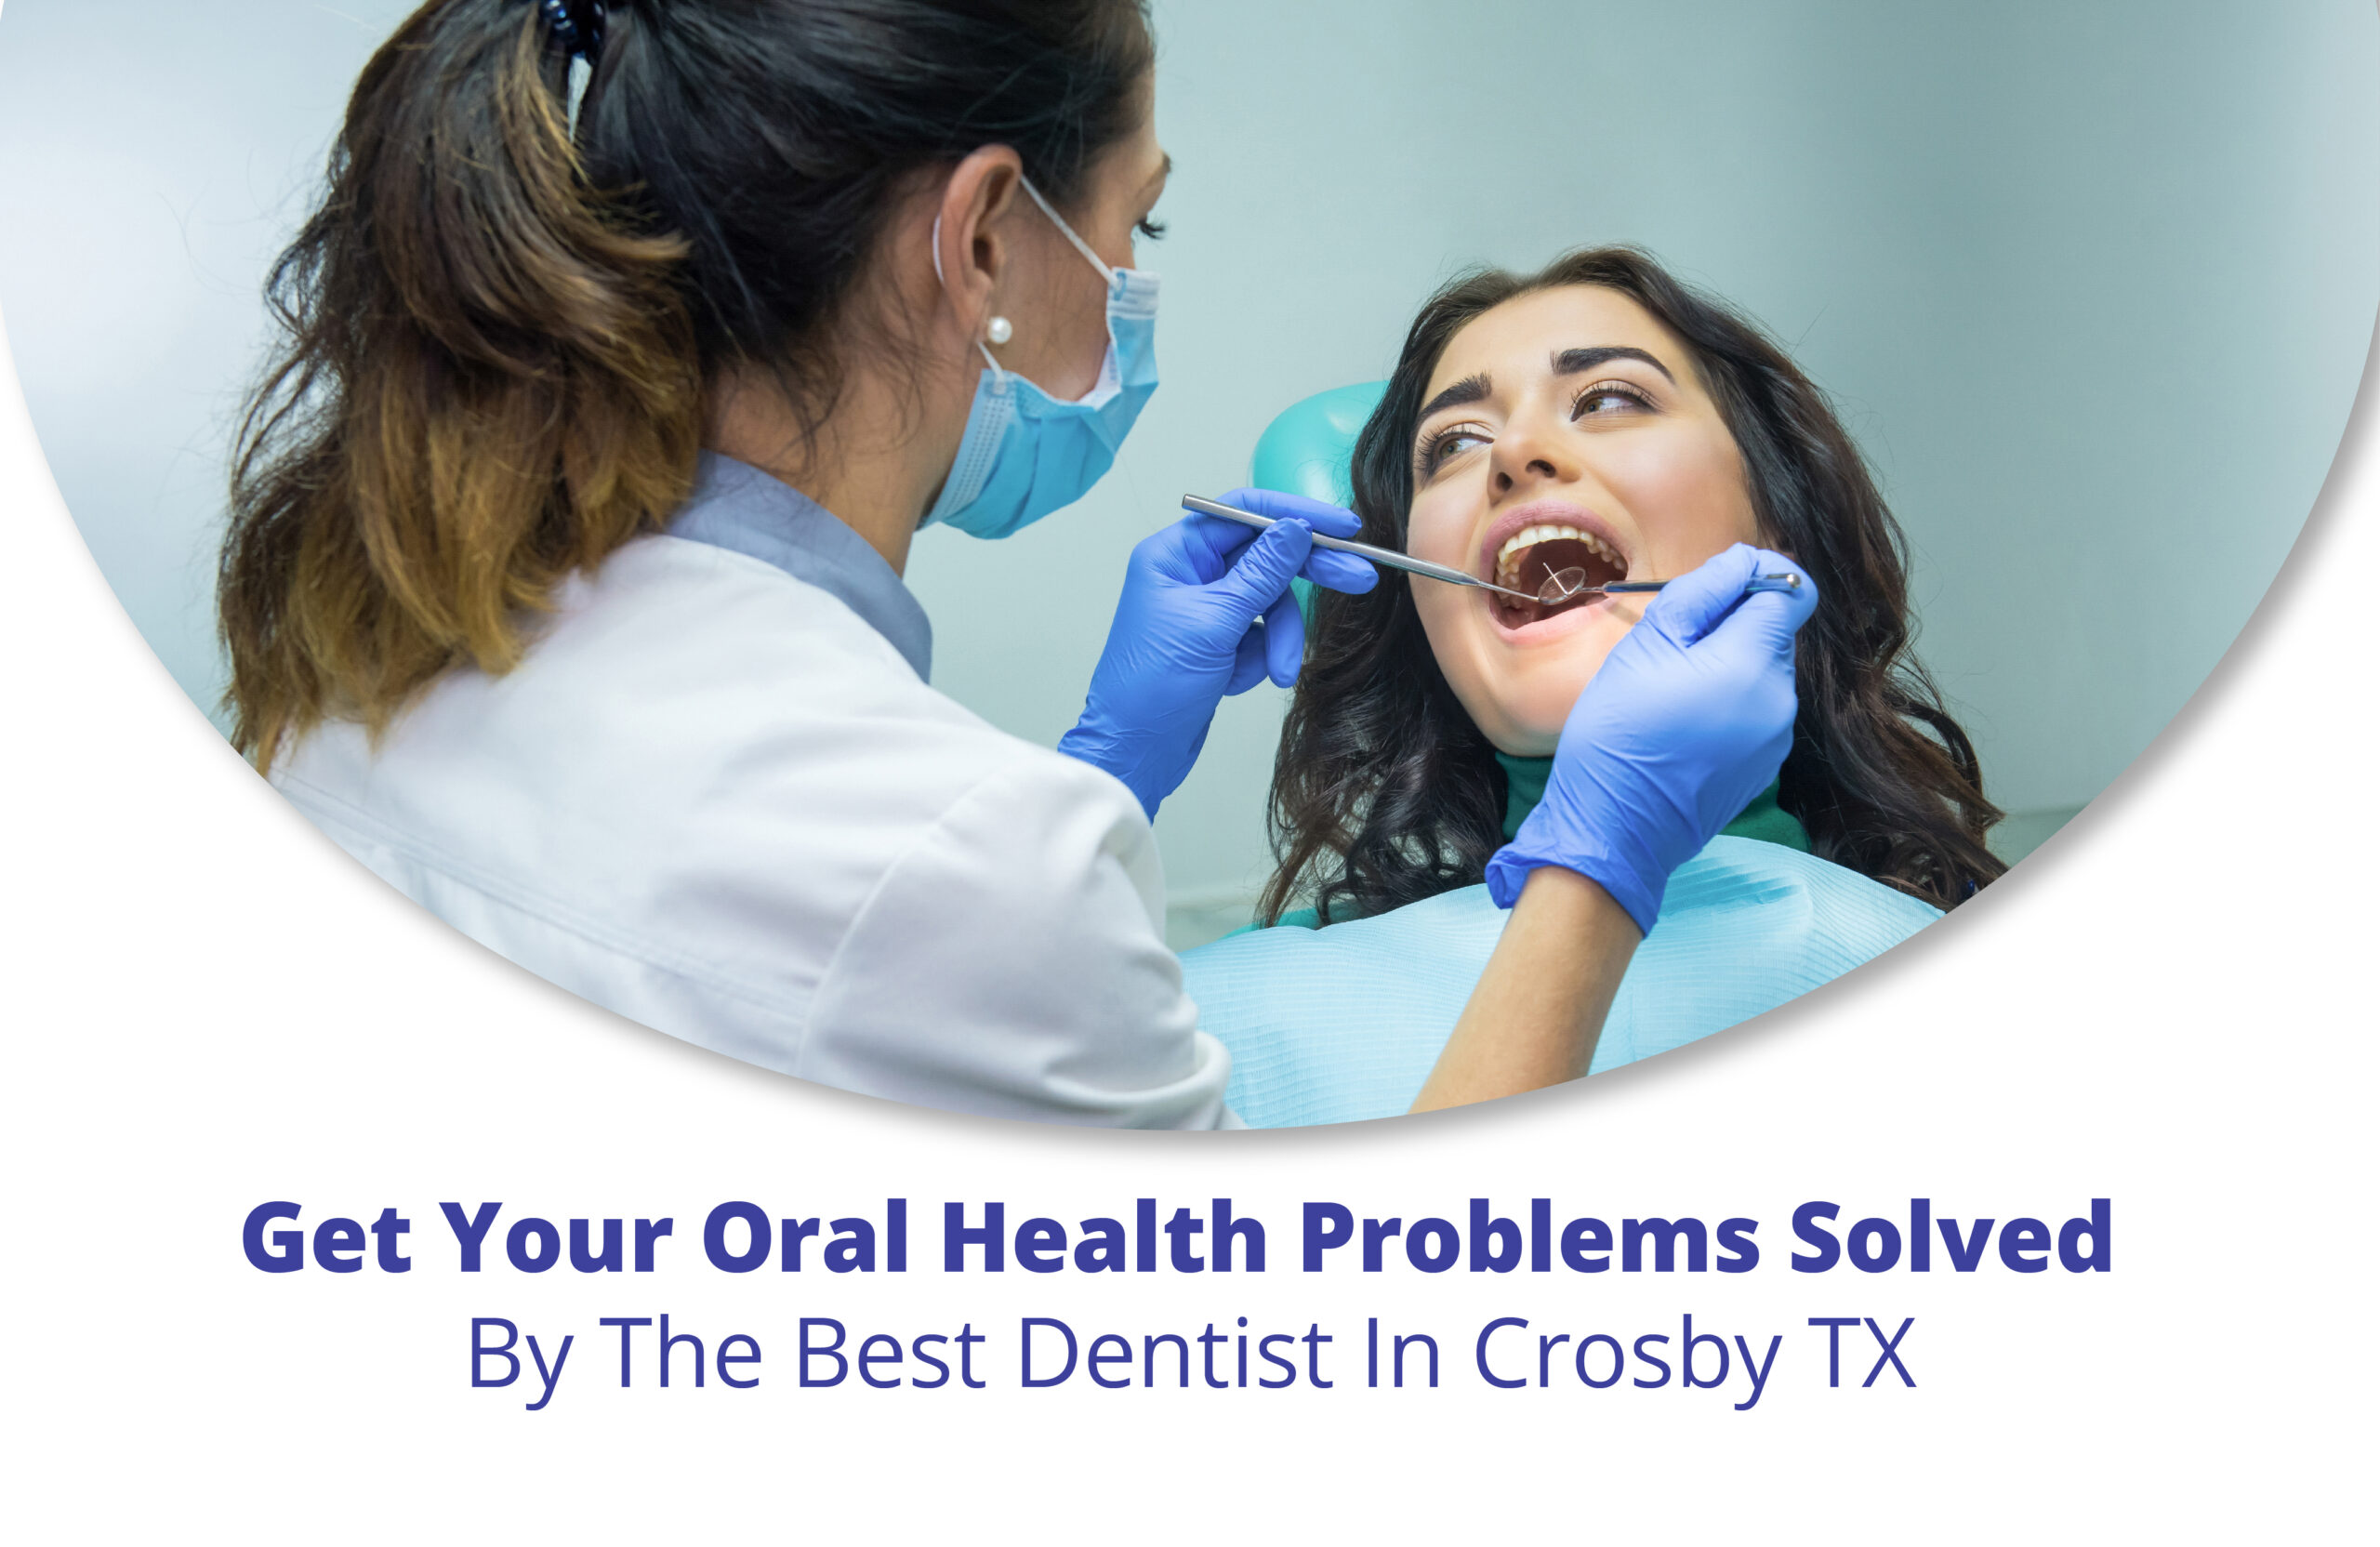 Get Your Oral Health Problems Solved By The Best Dentist In Crosby, TX